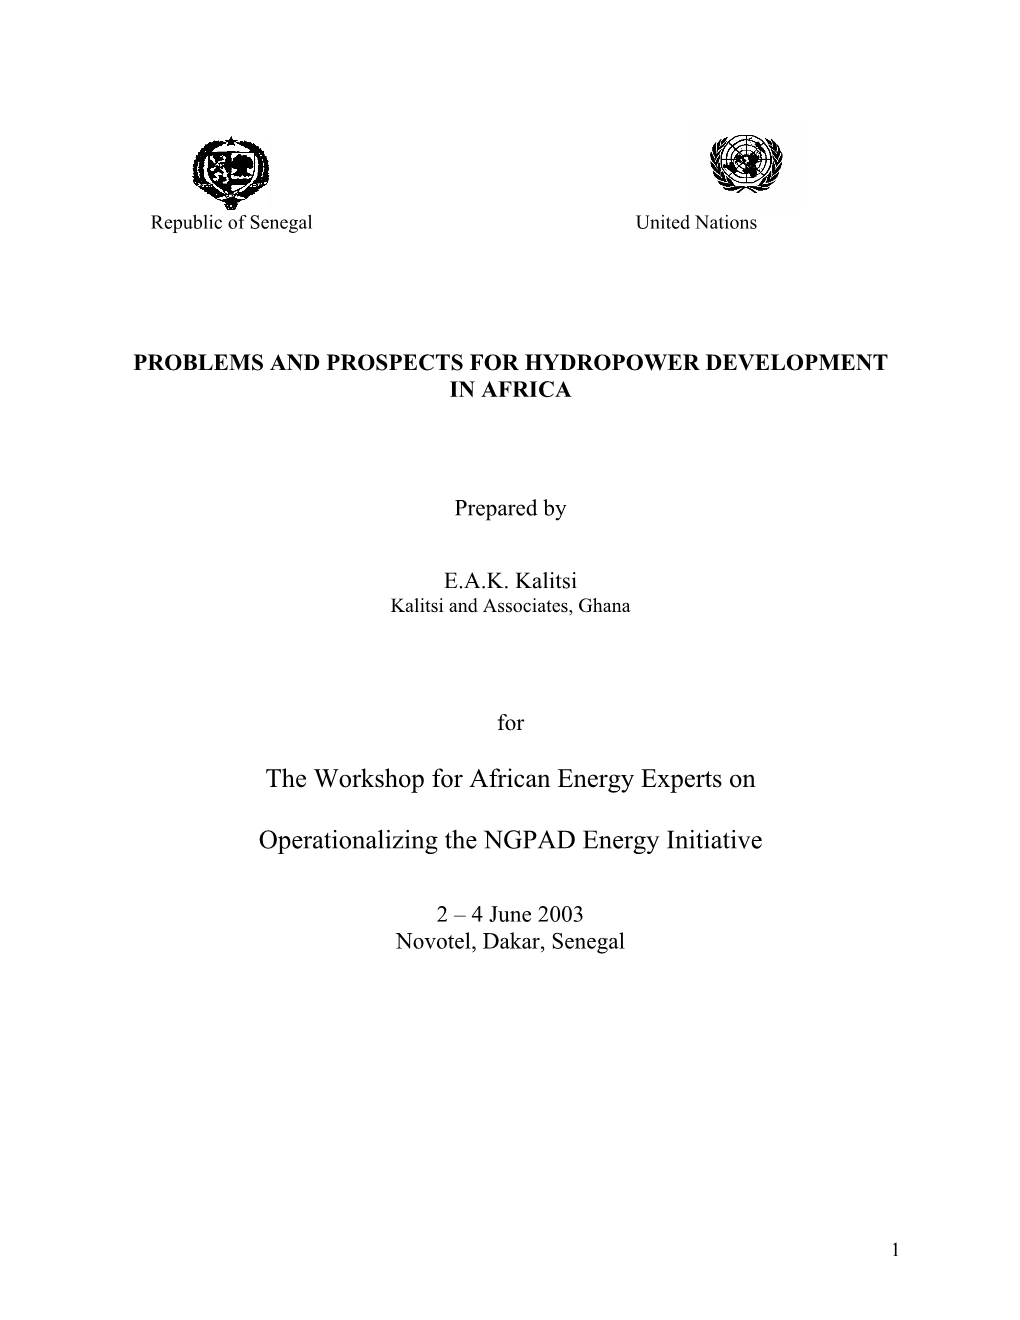 Problems and Prospects for Hydropower Development in Africa